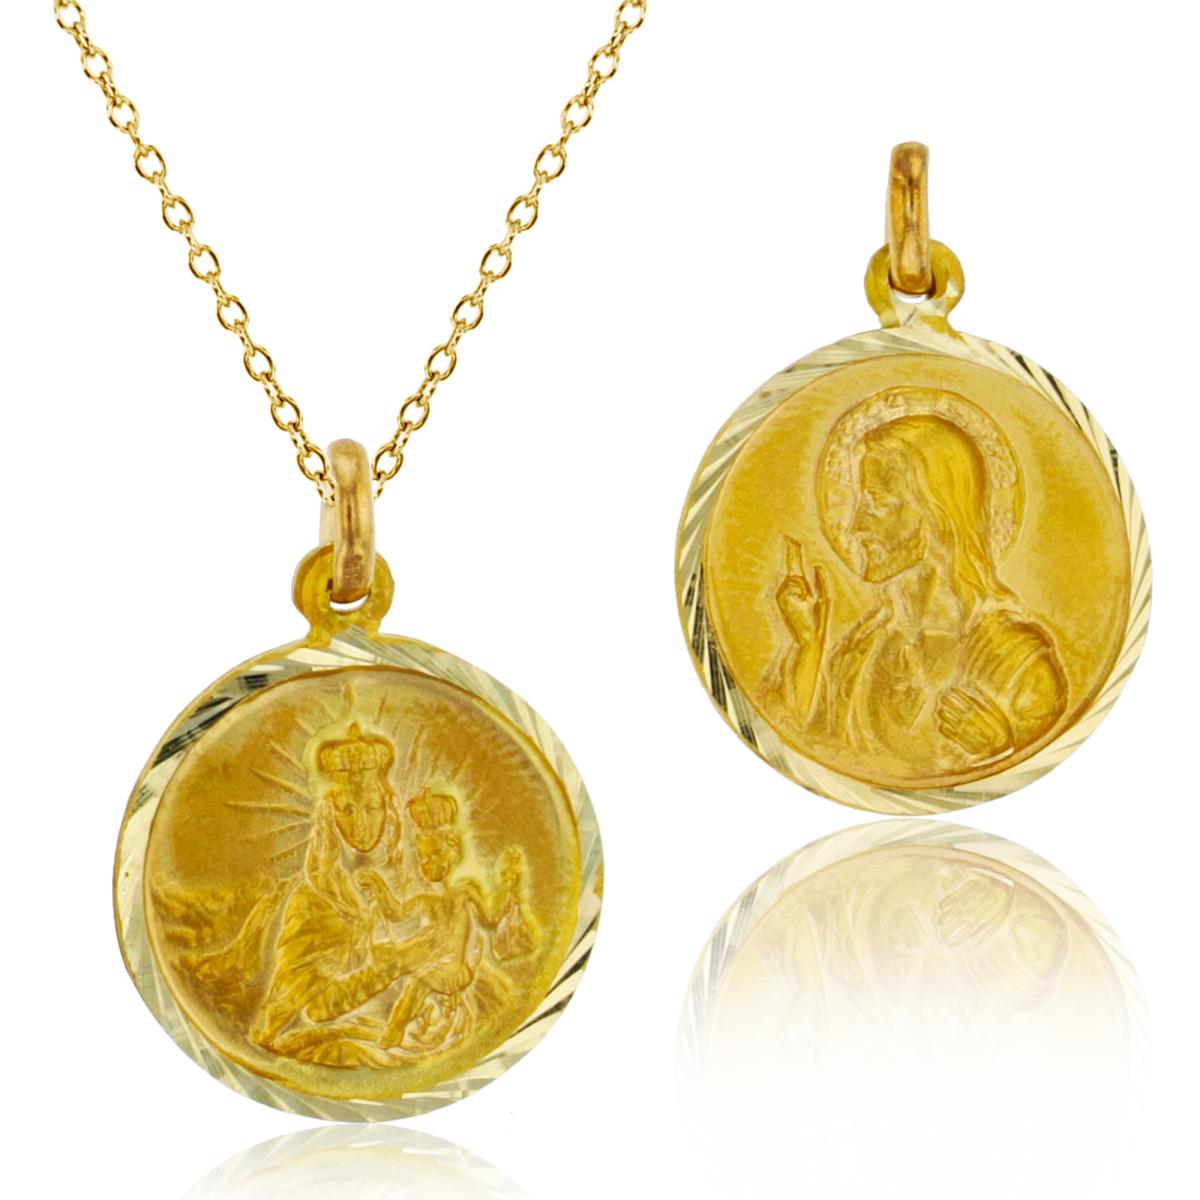 10K Yellow Gold 16mm 2 Sided St. Carmen with Baby / Jesus Medallion 18" Necklace